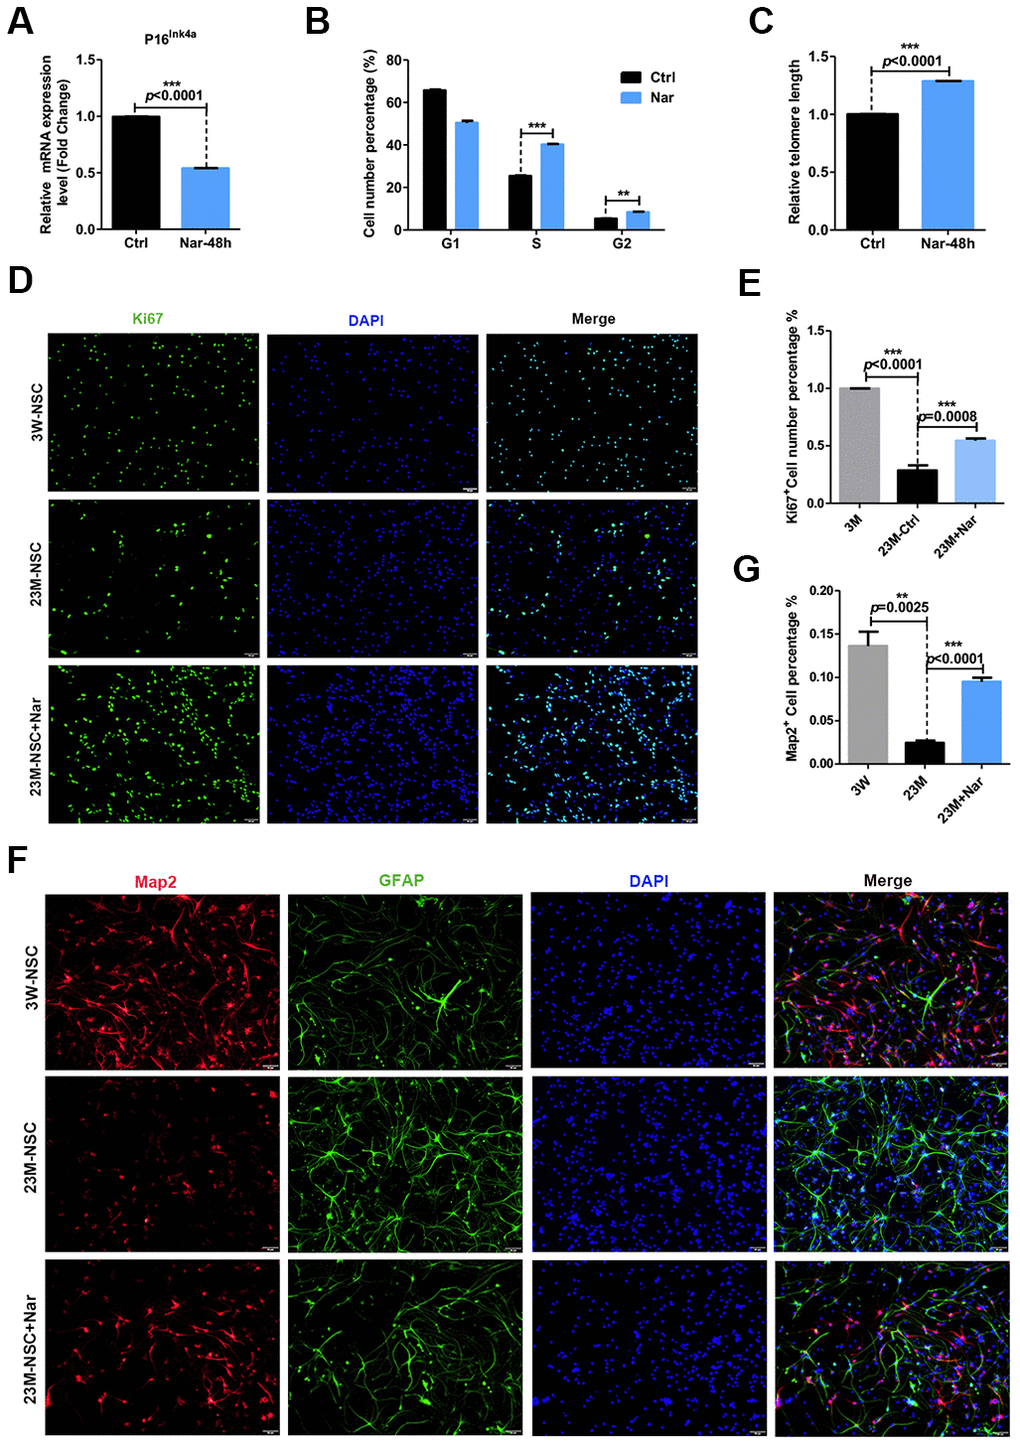 Effect of naringenin (Nar) on senescence of mouse neural stem cells (mNSCs). (A) p16ink4a mRNA expression was measured by qRT-PCR in 23M-NSCs with and without treatment of 6.8 μg/mL Nar for 48 h. (B) Cell cycle phase distributions of 23M-NSCs treated with Nar for 48 h and control cells. (C) The relative telomere length of 23M-NSCs increased significantly with Nar treatment. (D) Immunofluorescence Ki67 staining of mNSCs treated with Nar for 48 h, with DAPI nuclear labeling. (E) Quantification of (D). (F) Representative fields of MAP2 and GFAP immunofluorescence staining of cultured mNSCs after control and Nar treatment. (G) Quantification of (F). Data are presented as the mean ± SD of three independent experiments. *P P P 